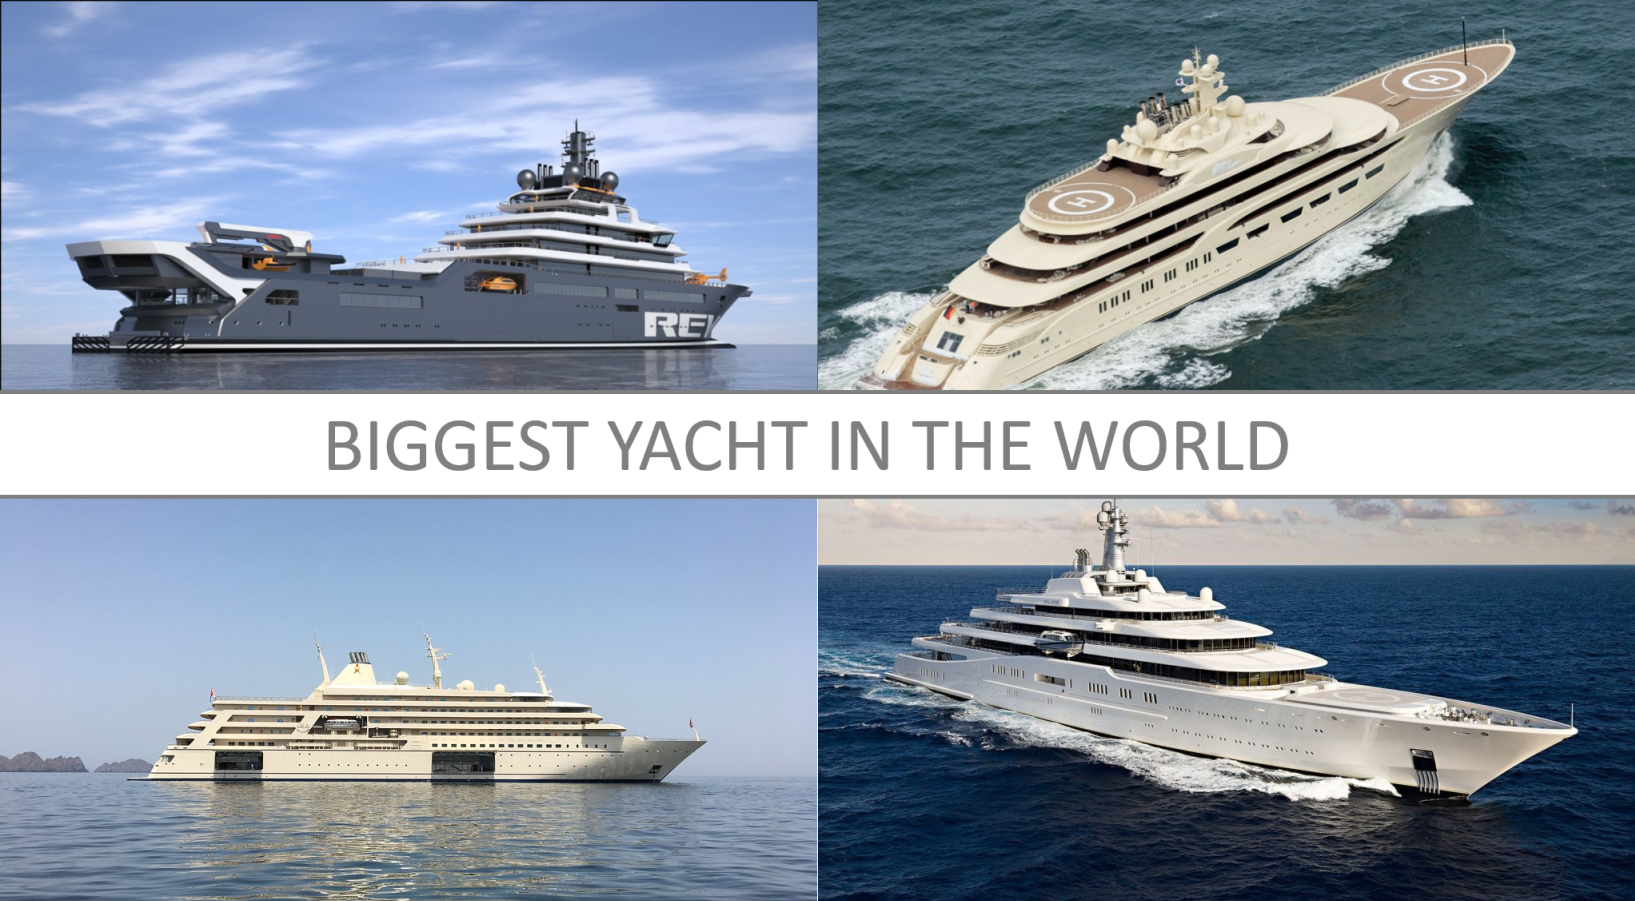 BIGGEST YACHT IN THE WORLD